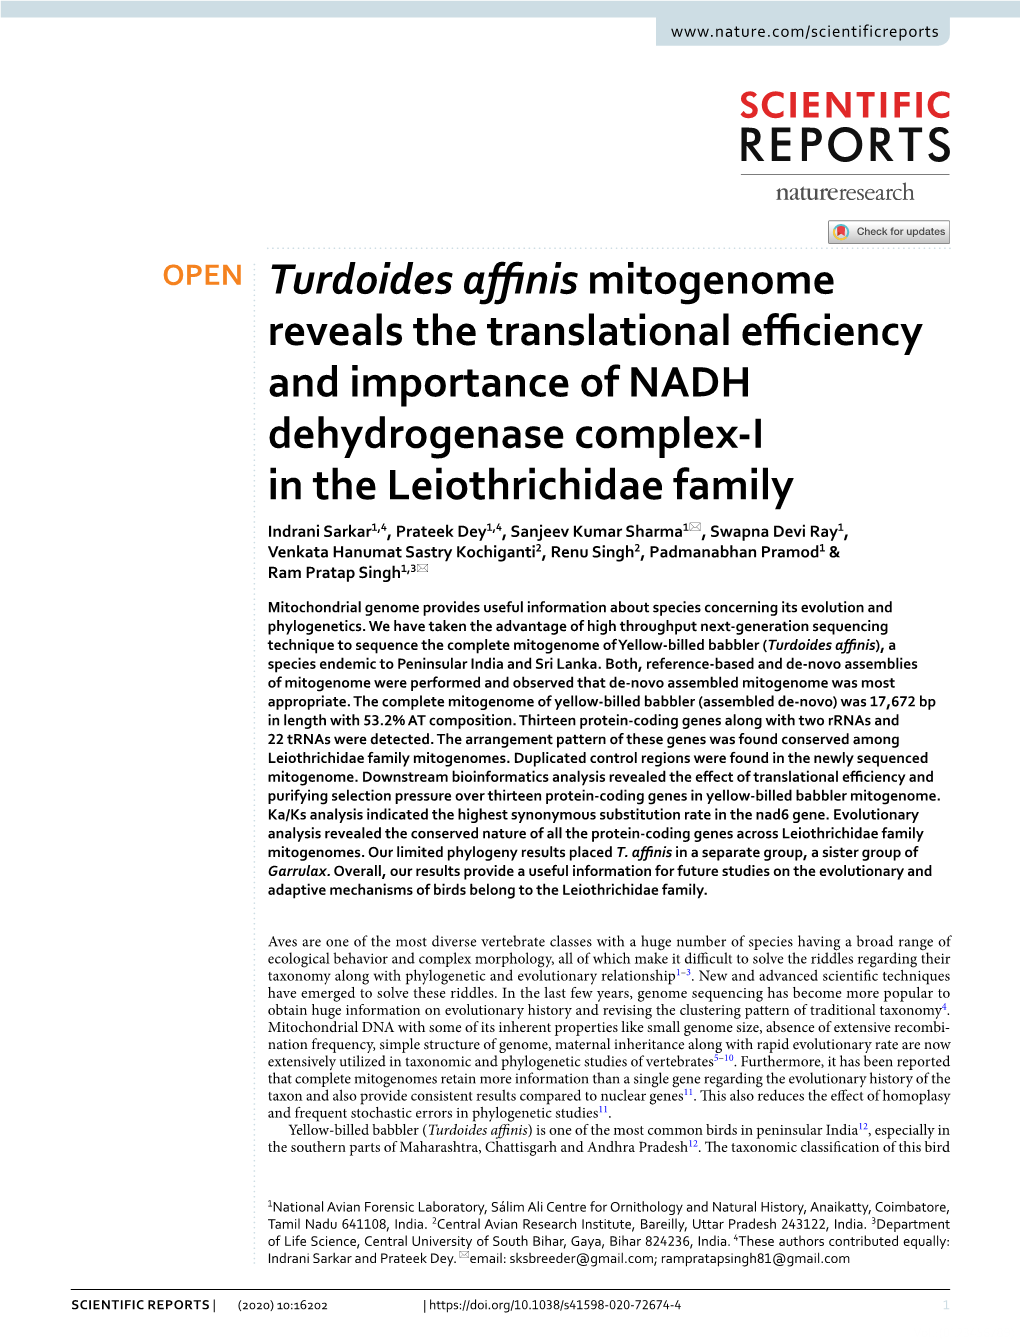 Turdoides Affinis Mitogenome Reveals the Translational Efficiency And